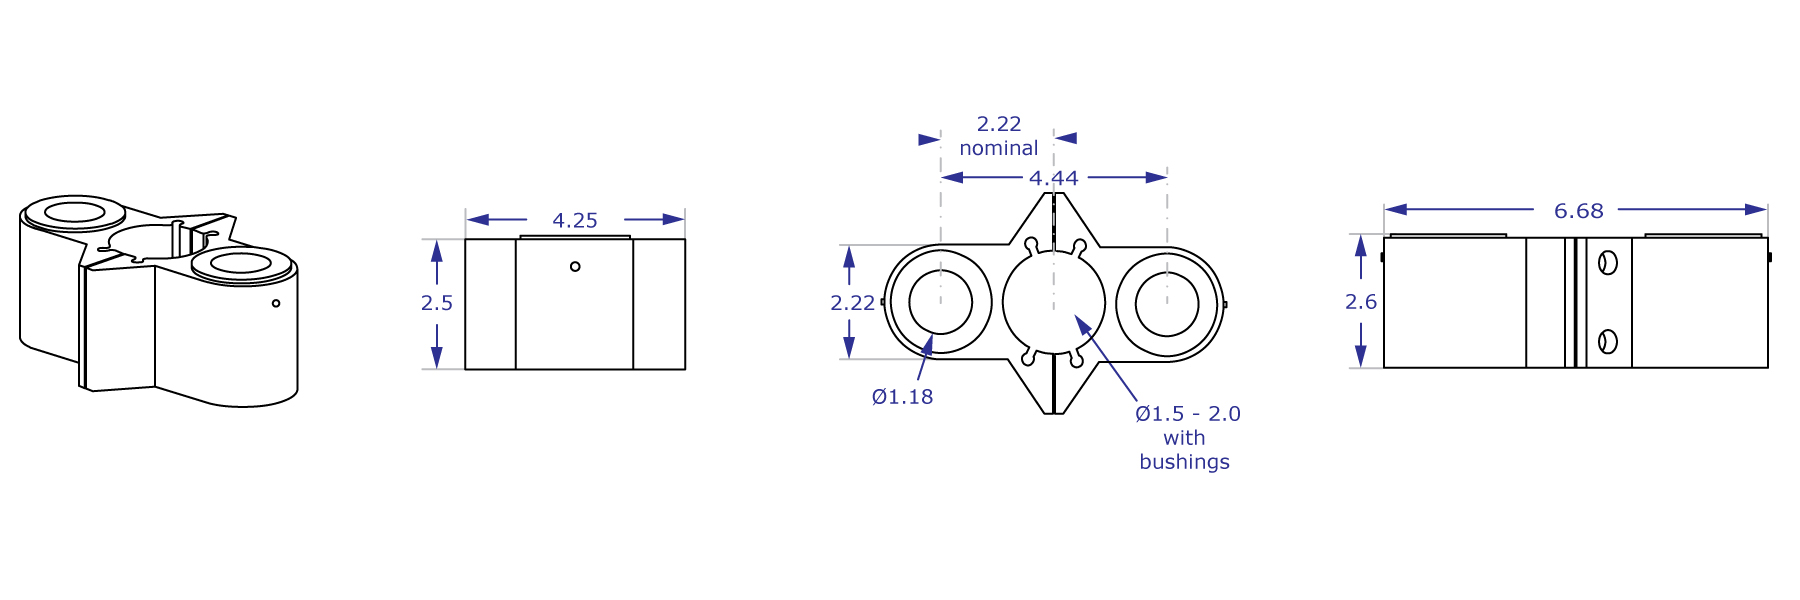 MKIT-J dual pole mount specification drawing shown from front, top and side with measurements